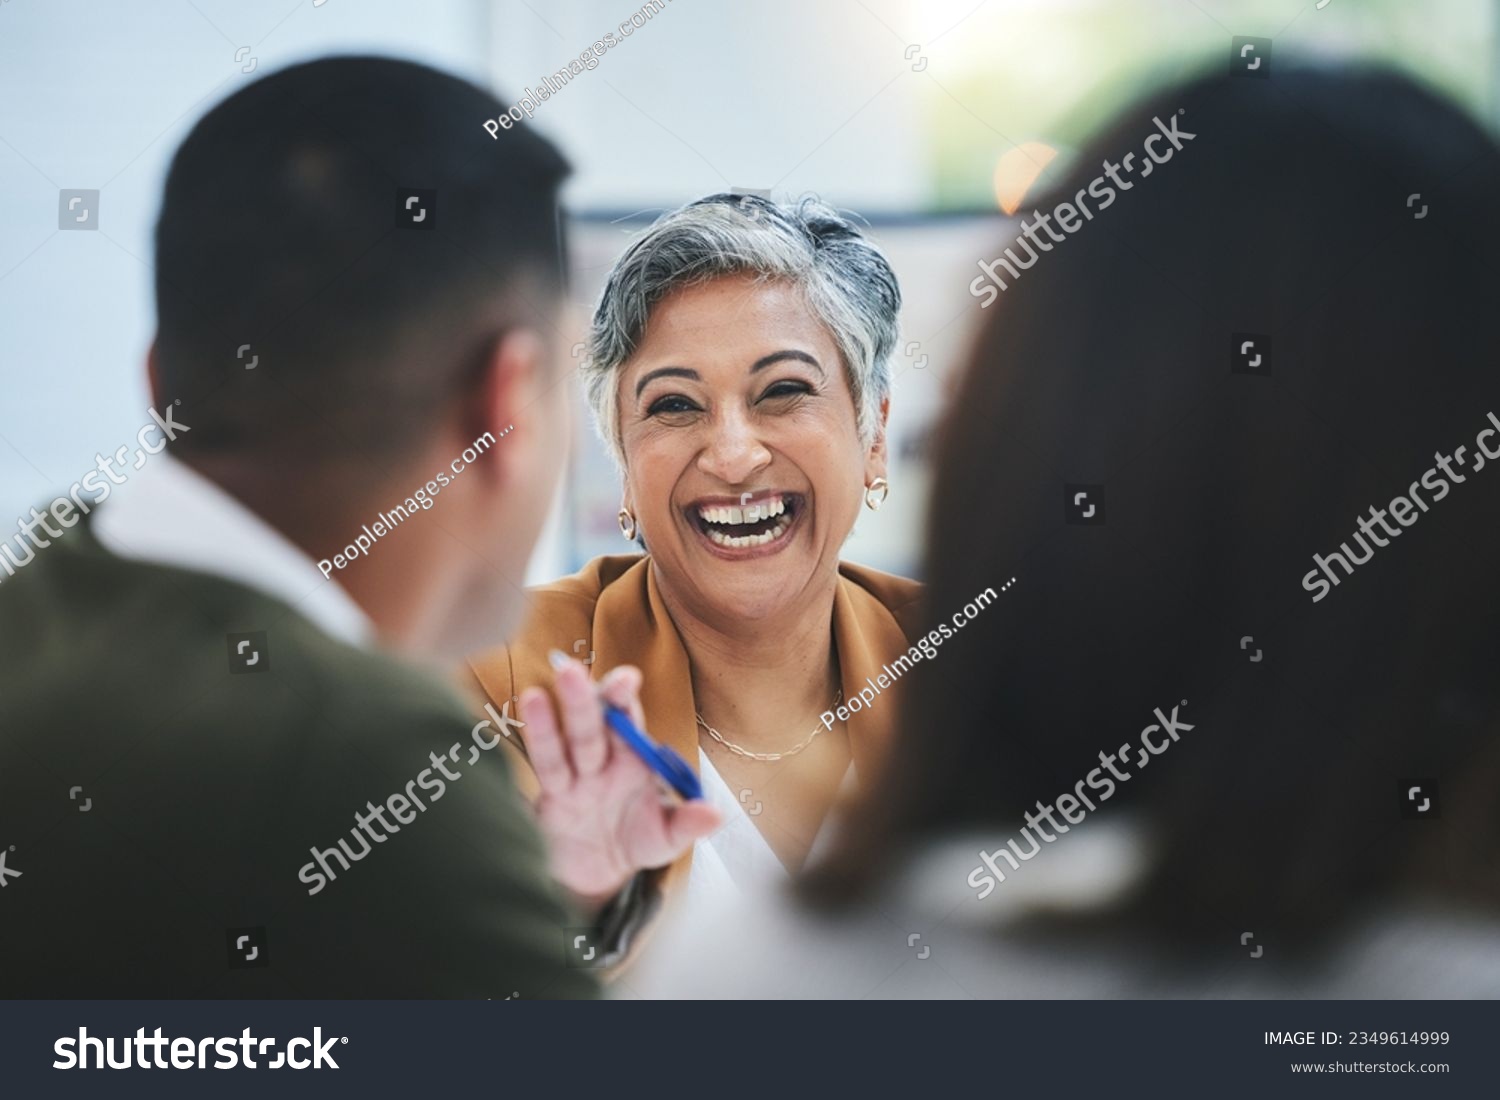 Team, happy woman or business people in meeting laughing at funny joke in discussion or collaboration together. Smile, leadership or excited mature mentor talking or speaking of ideas to employees #2349614999